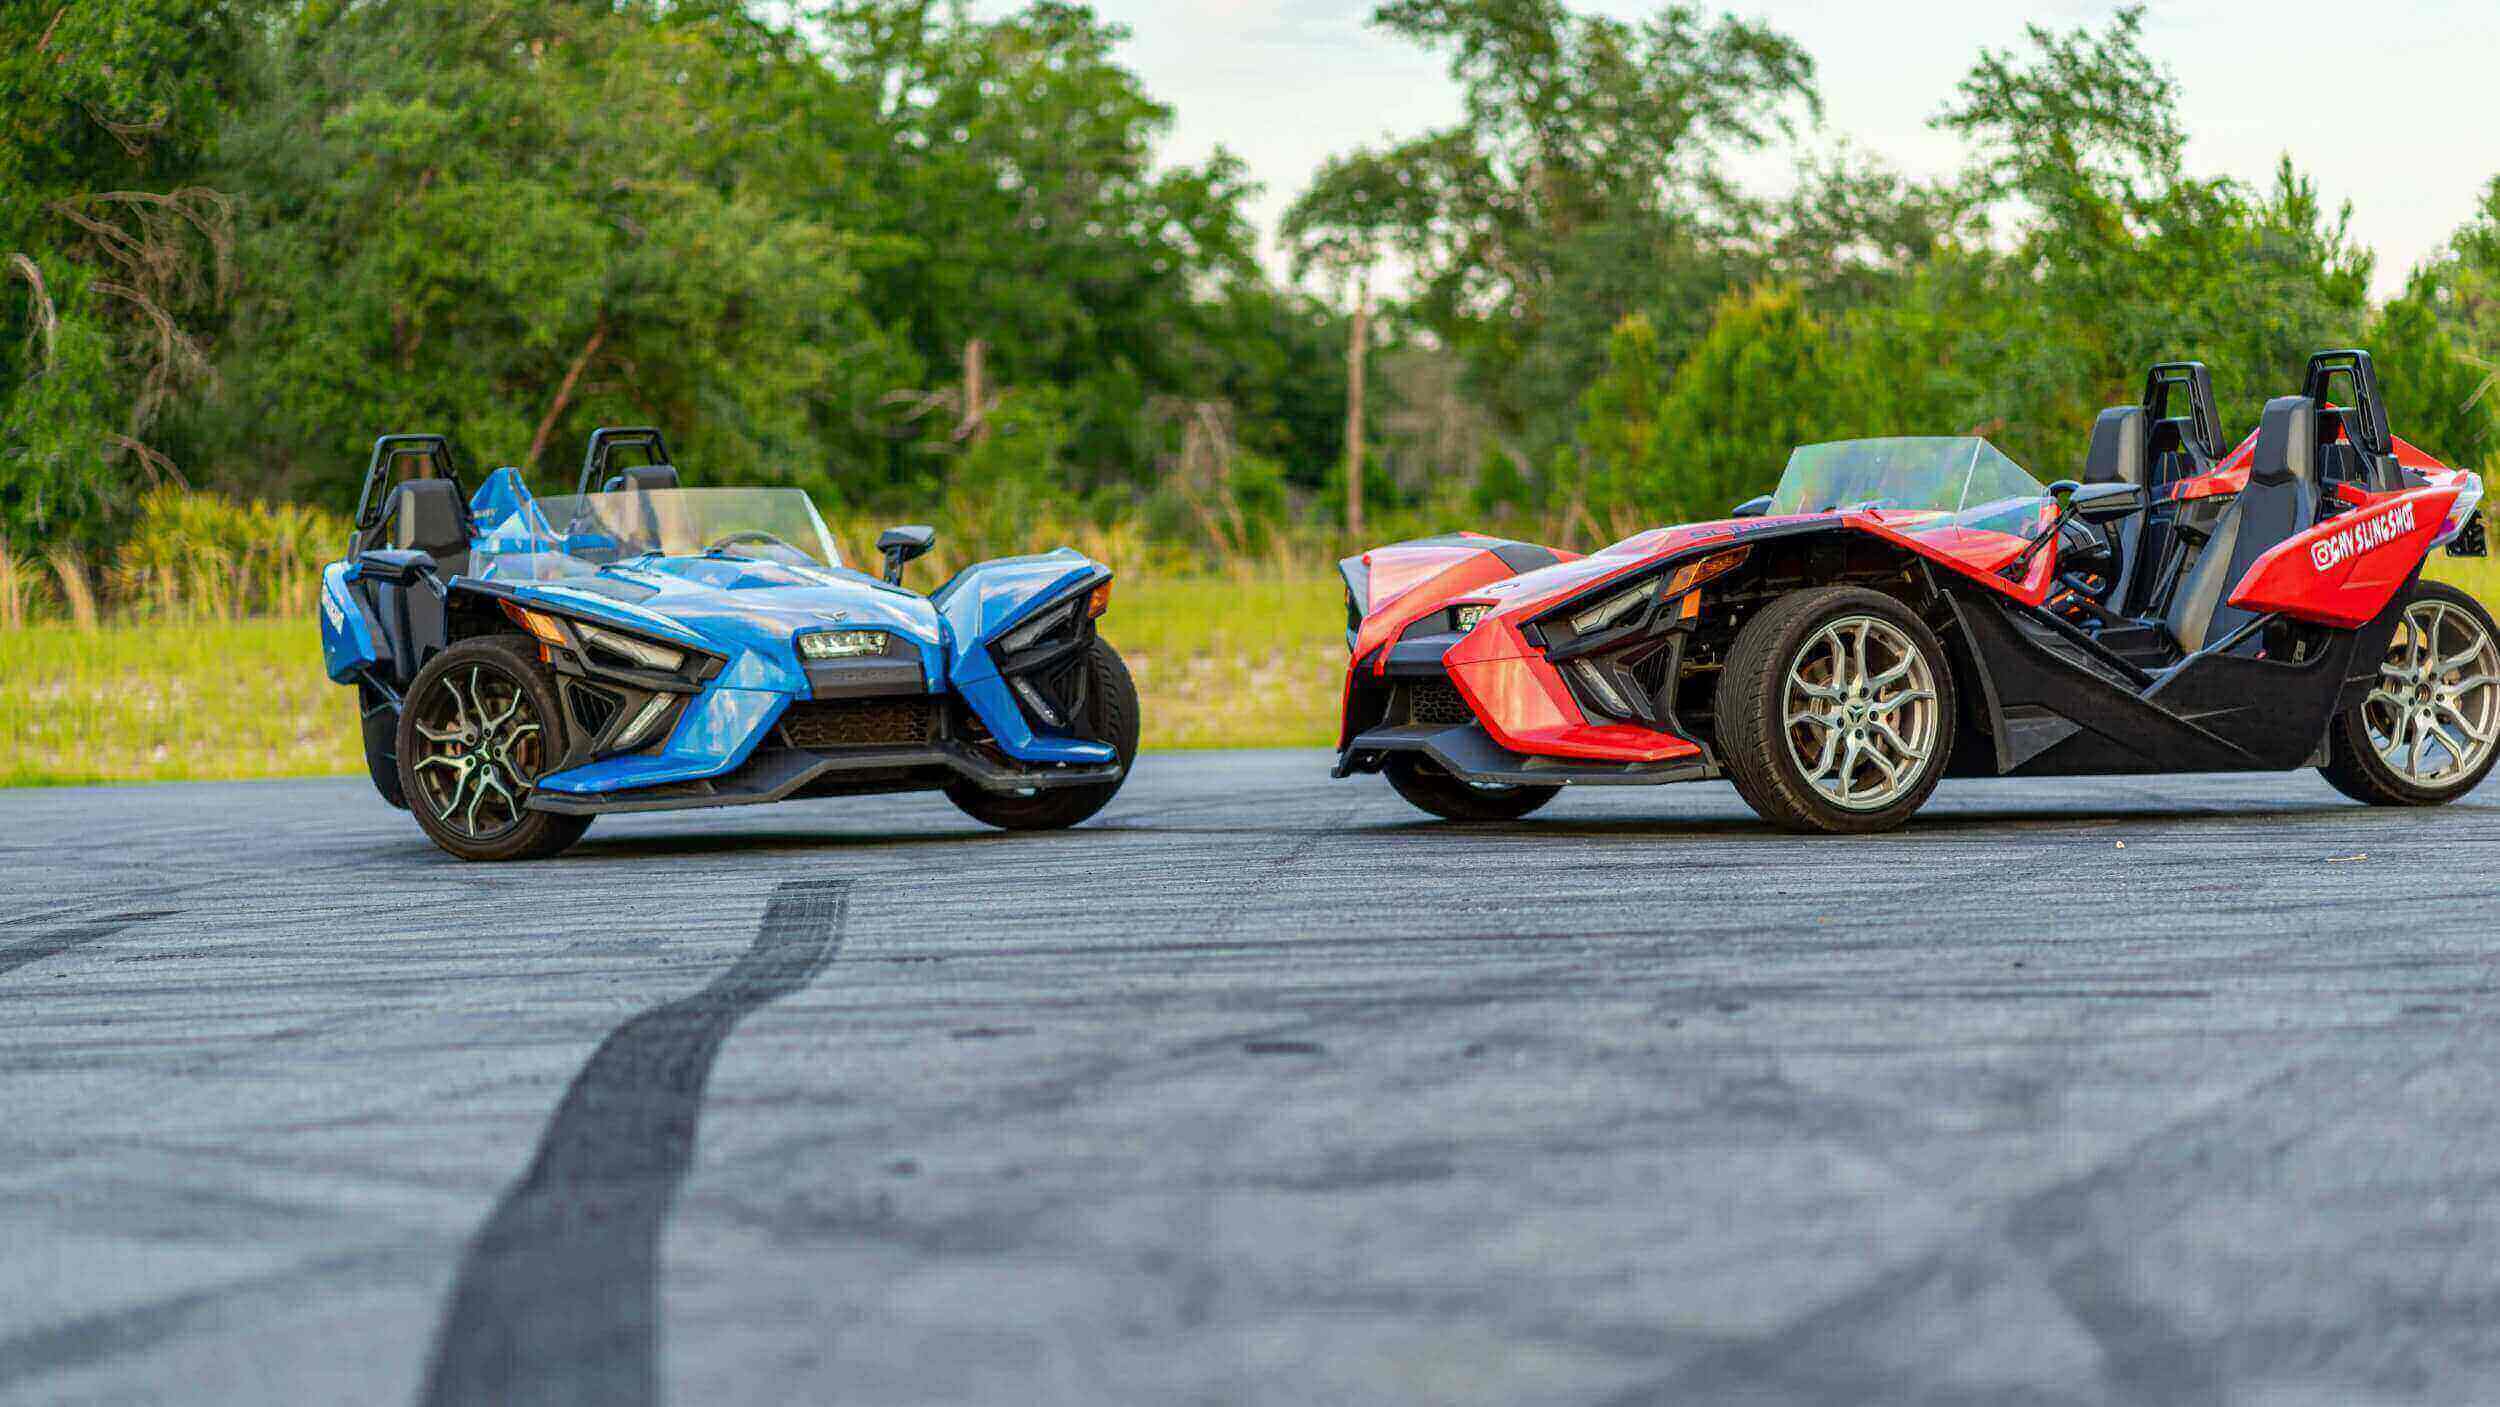 Two Polaris Slingshot rental vehicles parked side-by-side in a parking lot